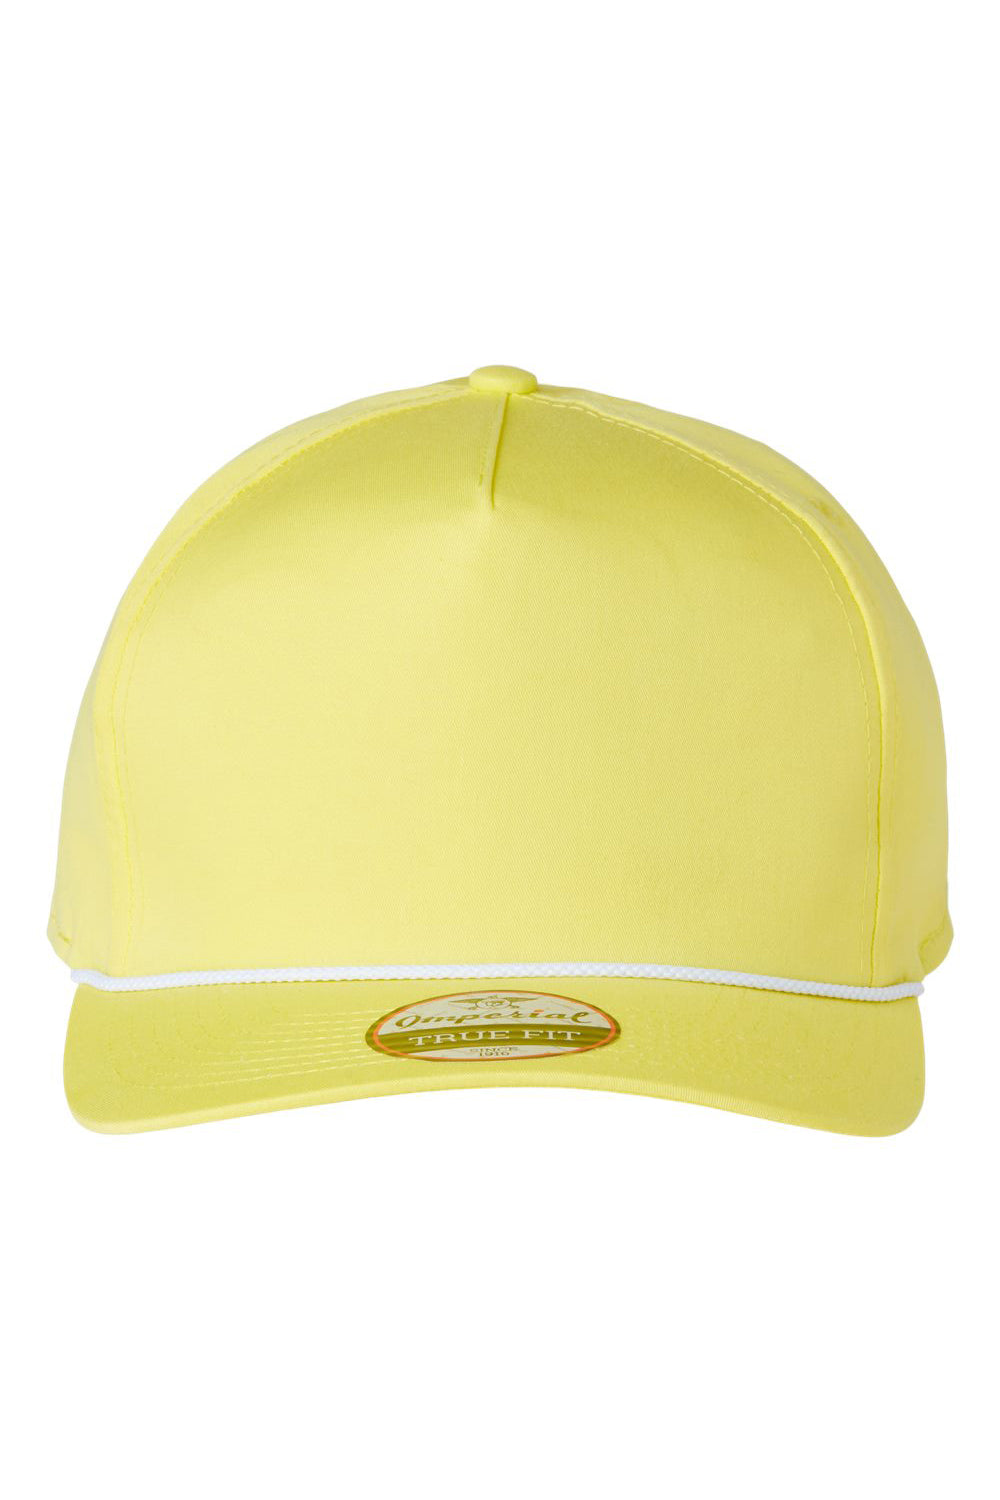 Imperial 5056 Mens The Barnes Hat Sunshine Yellow/White Flat Front